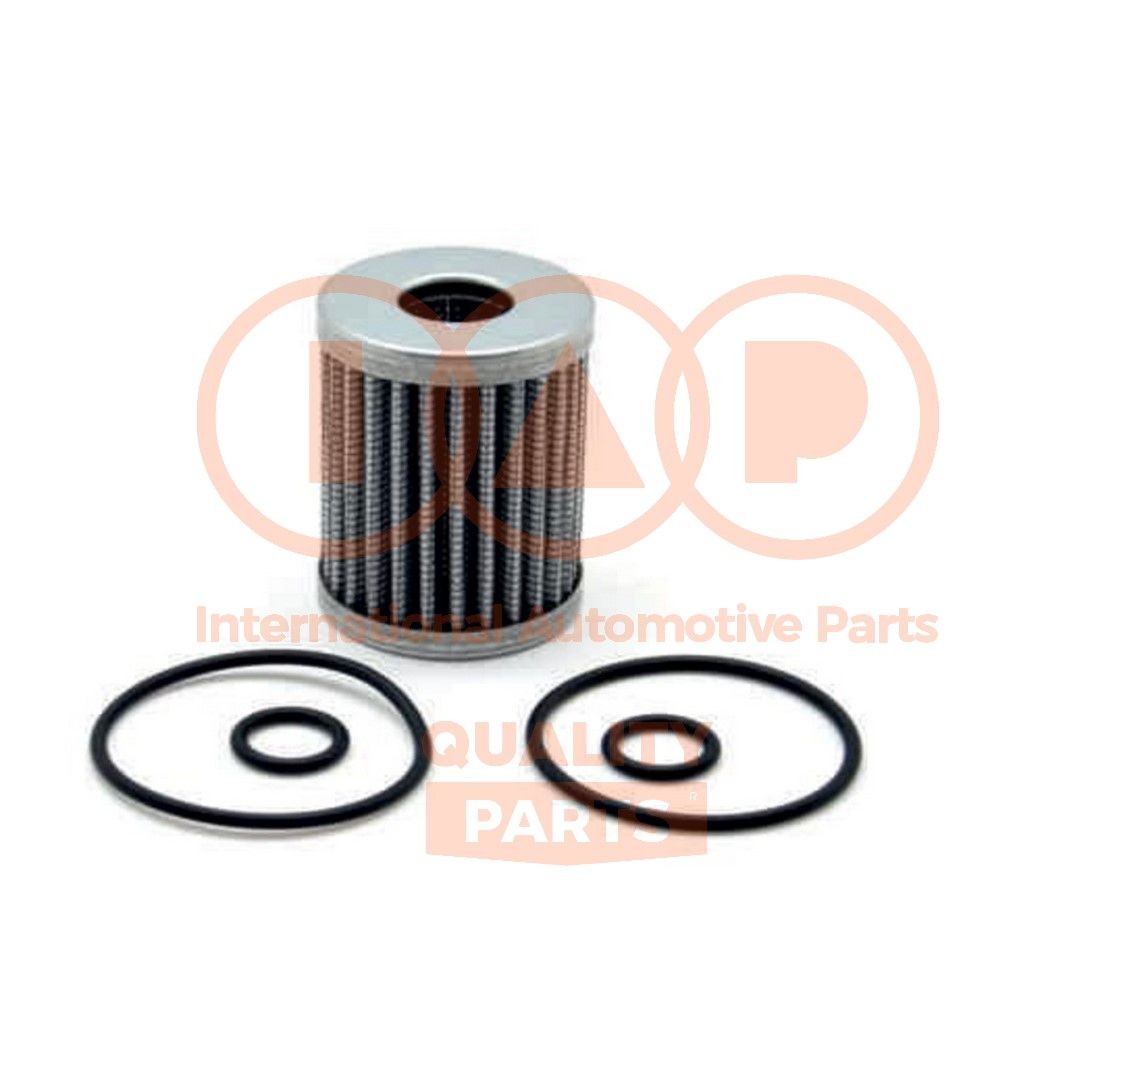 IAP QUALITY PARTS Filter Insert, 17mm, 17mm Height: 42mm Inline fuel filter 122-GAS07P buy